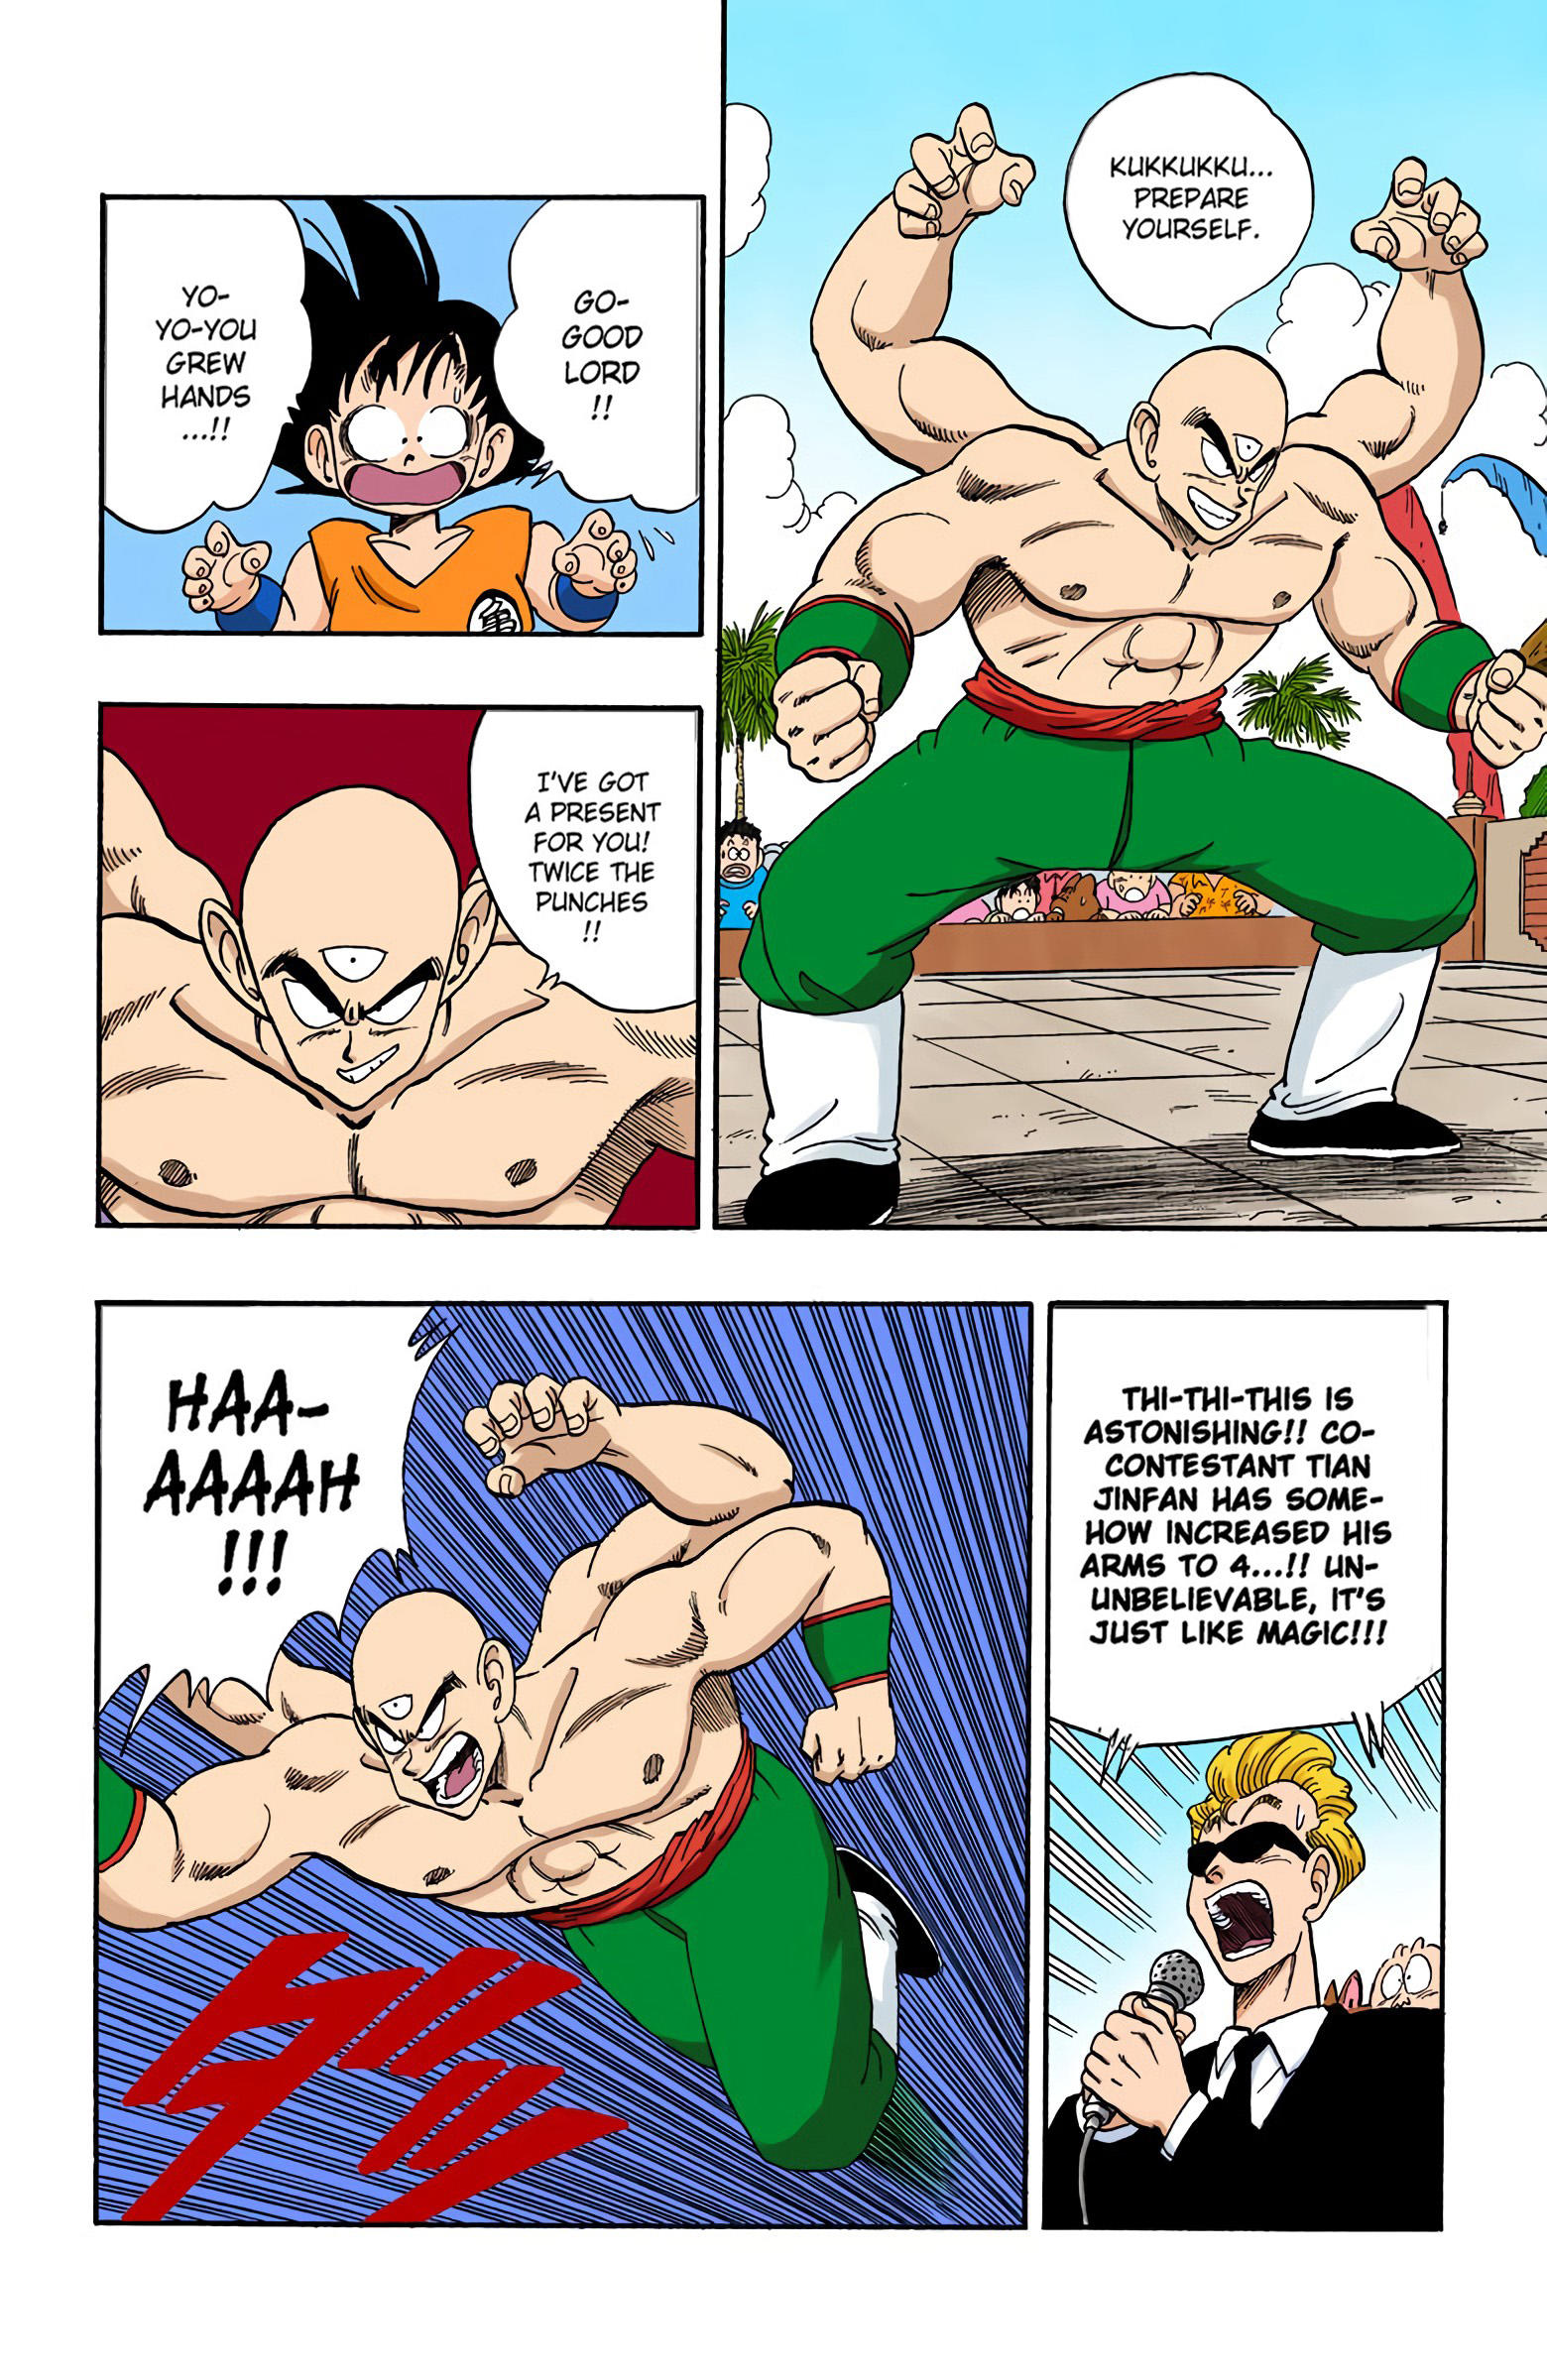 Dragon Ball - Full Color Edition Vol.11 Chapter 132: The Arms Race page 6 - Mangakakalot